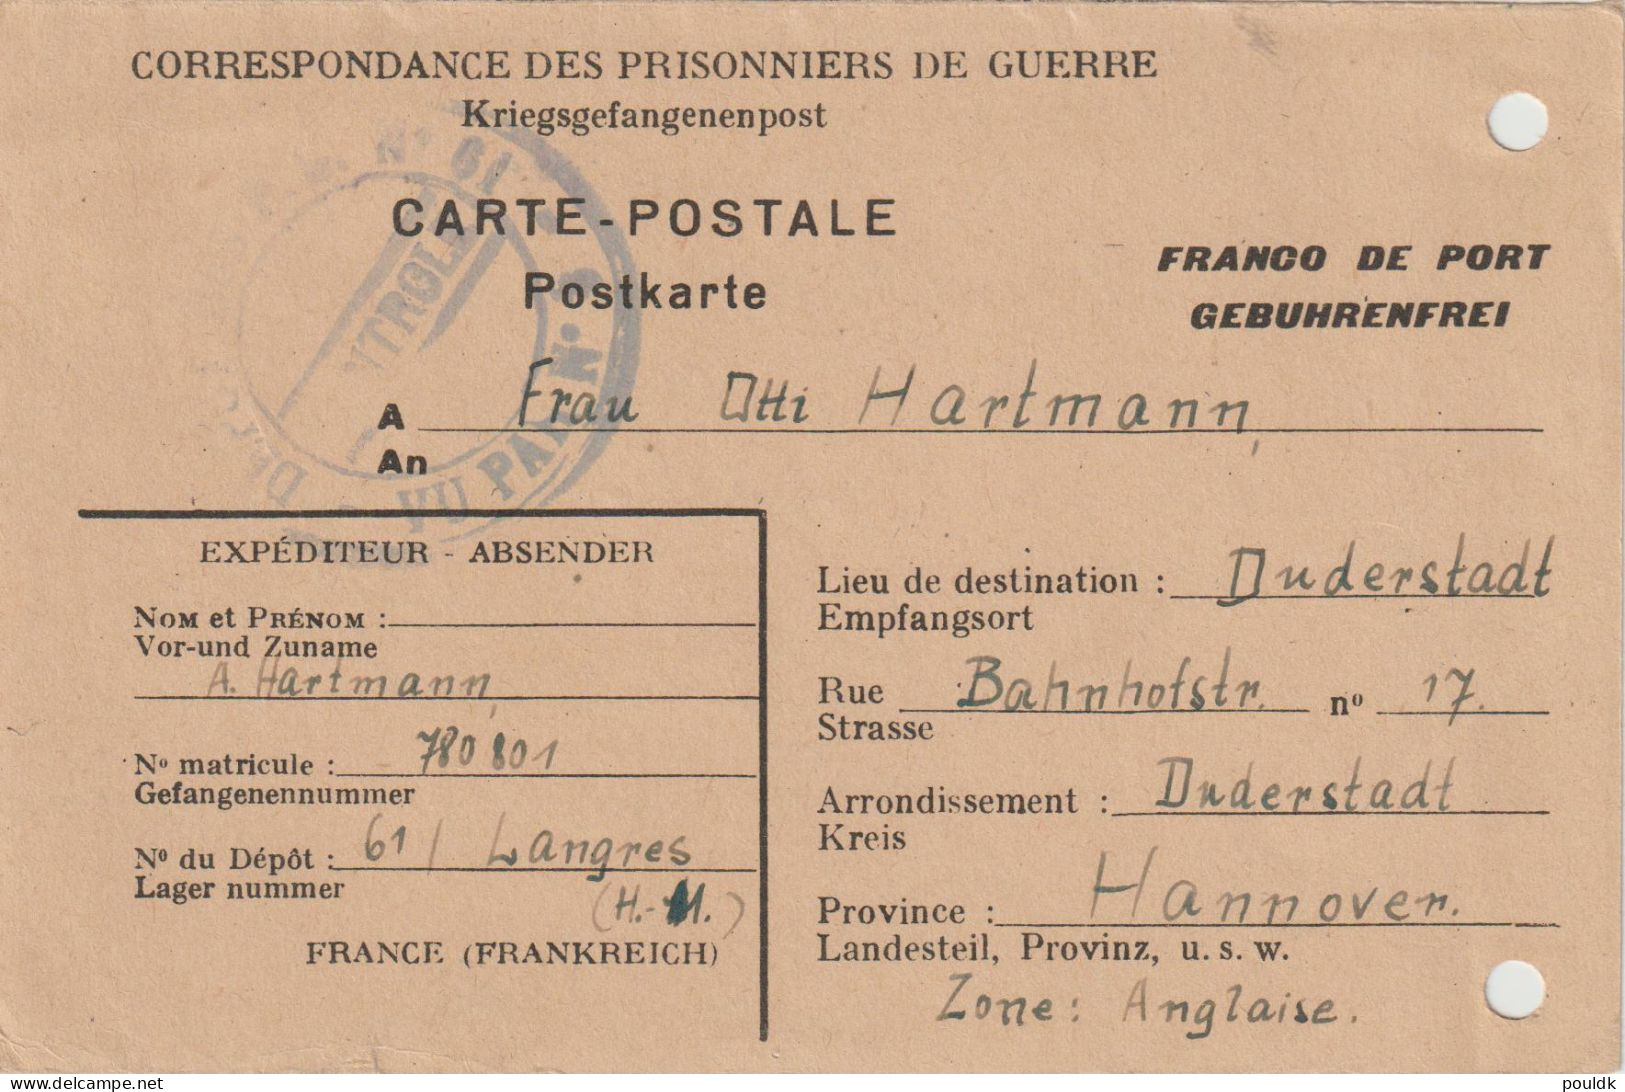 German Prisoner Of War Card From France, P.G. Depot 61 Located Langres (Haute Marne) Signed  27.10.1947. With Archive - Militaria